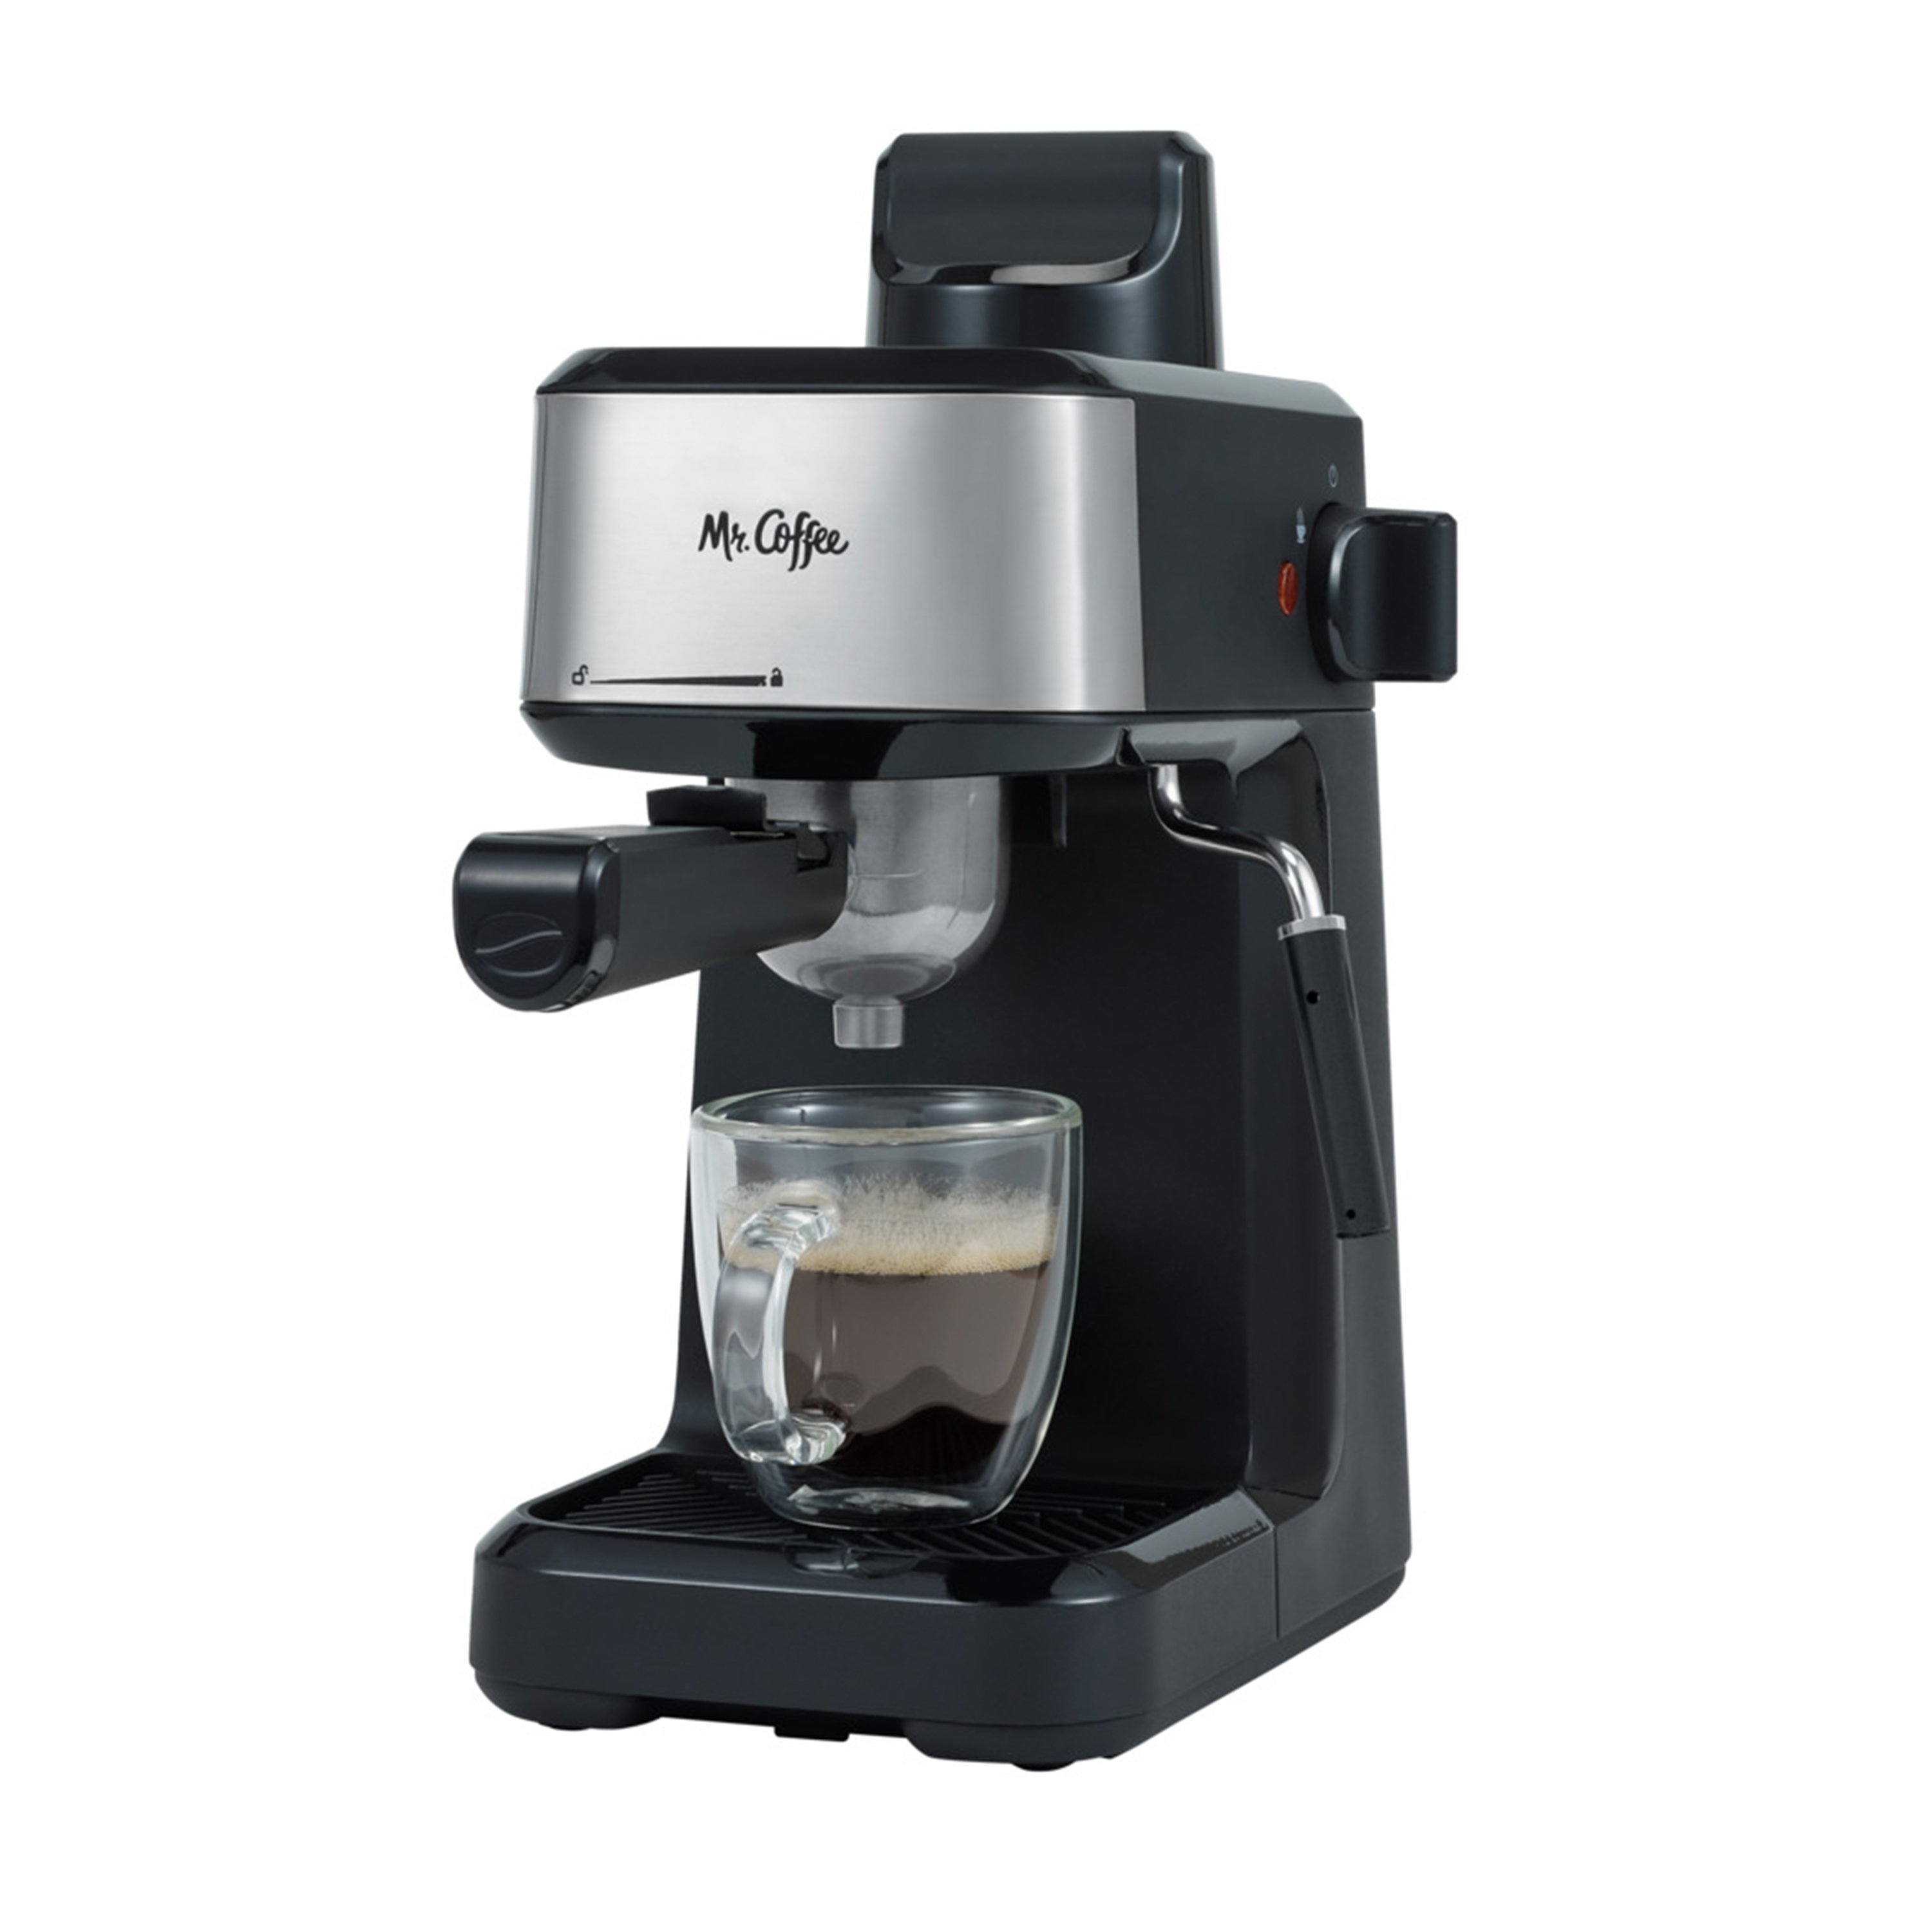 Cafetera Programable Mr.Coffee Acero Inoxidable – XtremeChiwas